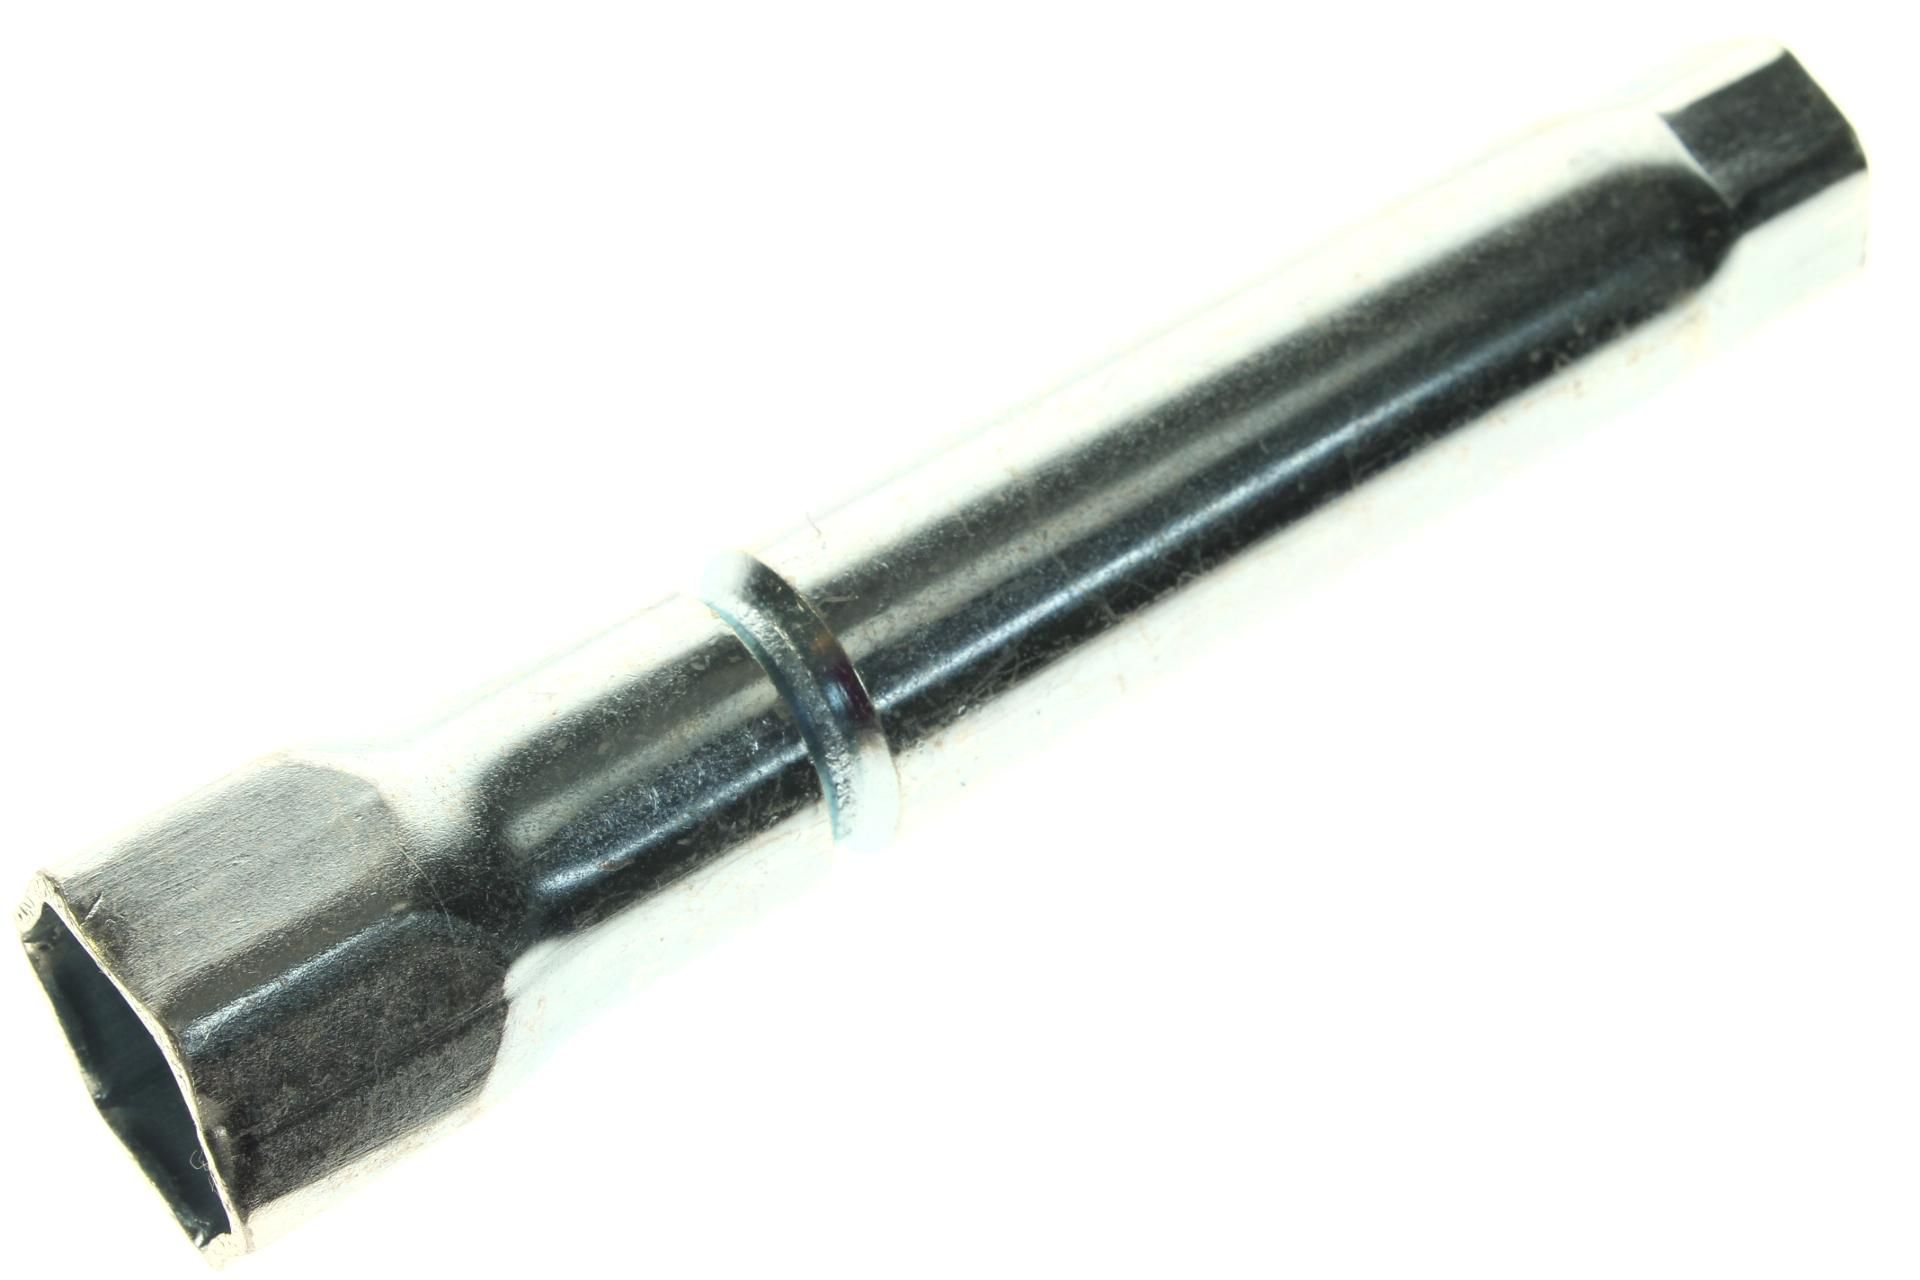 89216-MB0-000 SPARK PLUG WRENCH